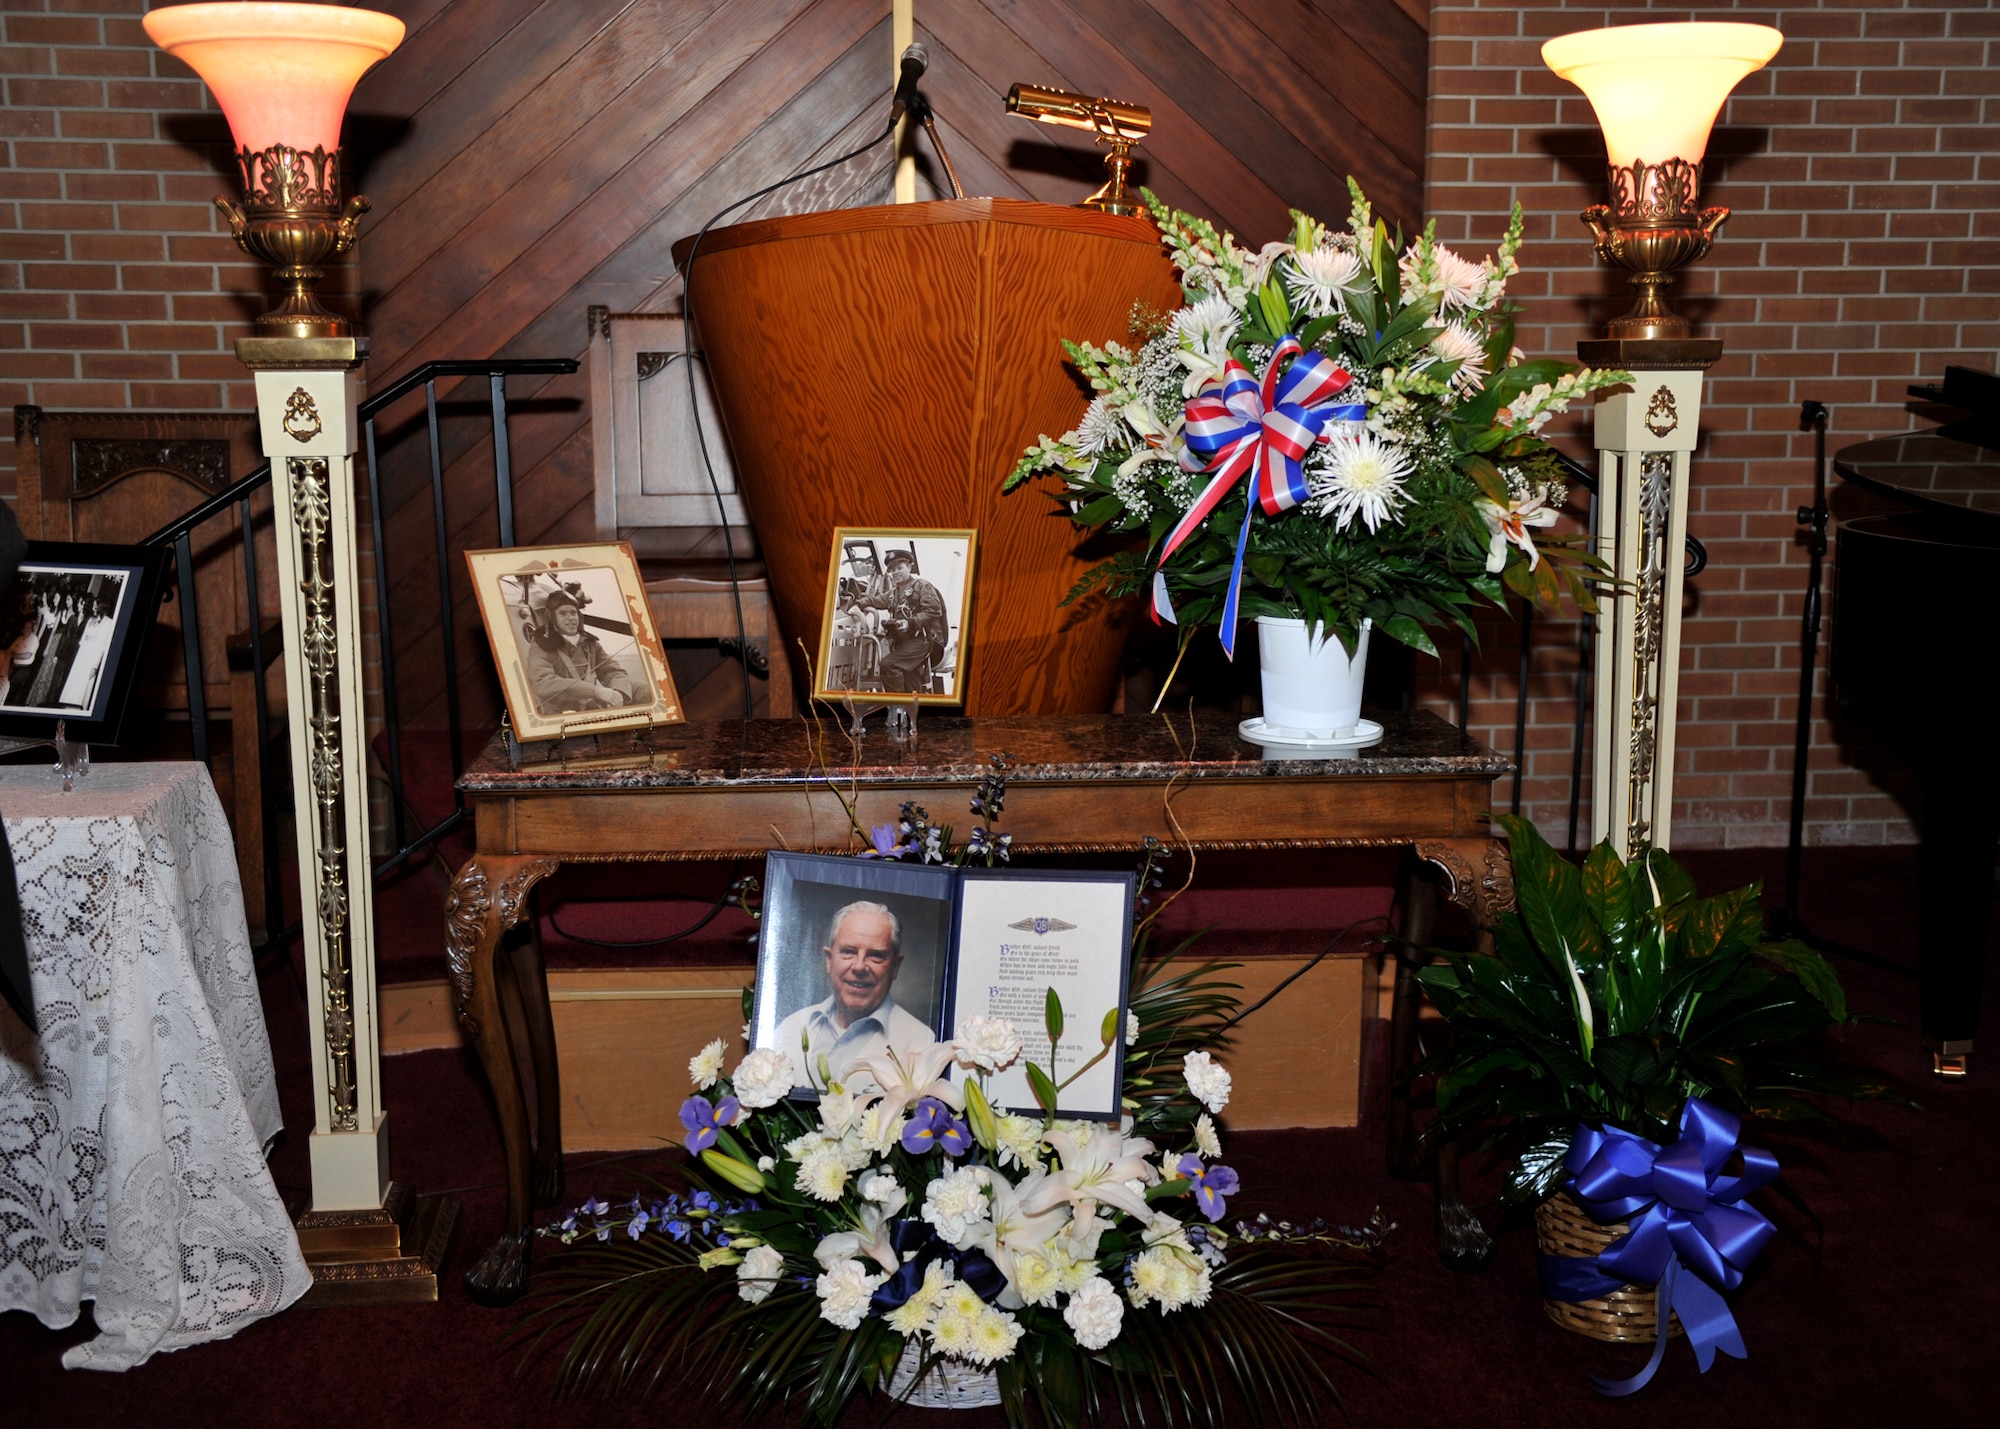 Photos of U.S. Air Force Col. (Ret.) Robert “Don” Gregor are displayed at the Wilson Funeral Home Chapel in Panama City, Fla. March 1 for his funeral. Gregor was the Tyndall base commander and the vice commander of the Weapons Center at one point in his career.  (U.S. Air Force photo by Airman 1st Class Sergio A. Gamboa/Released)